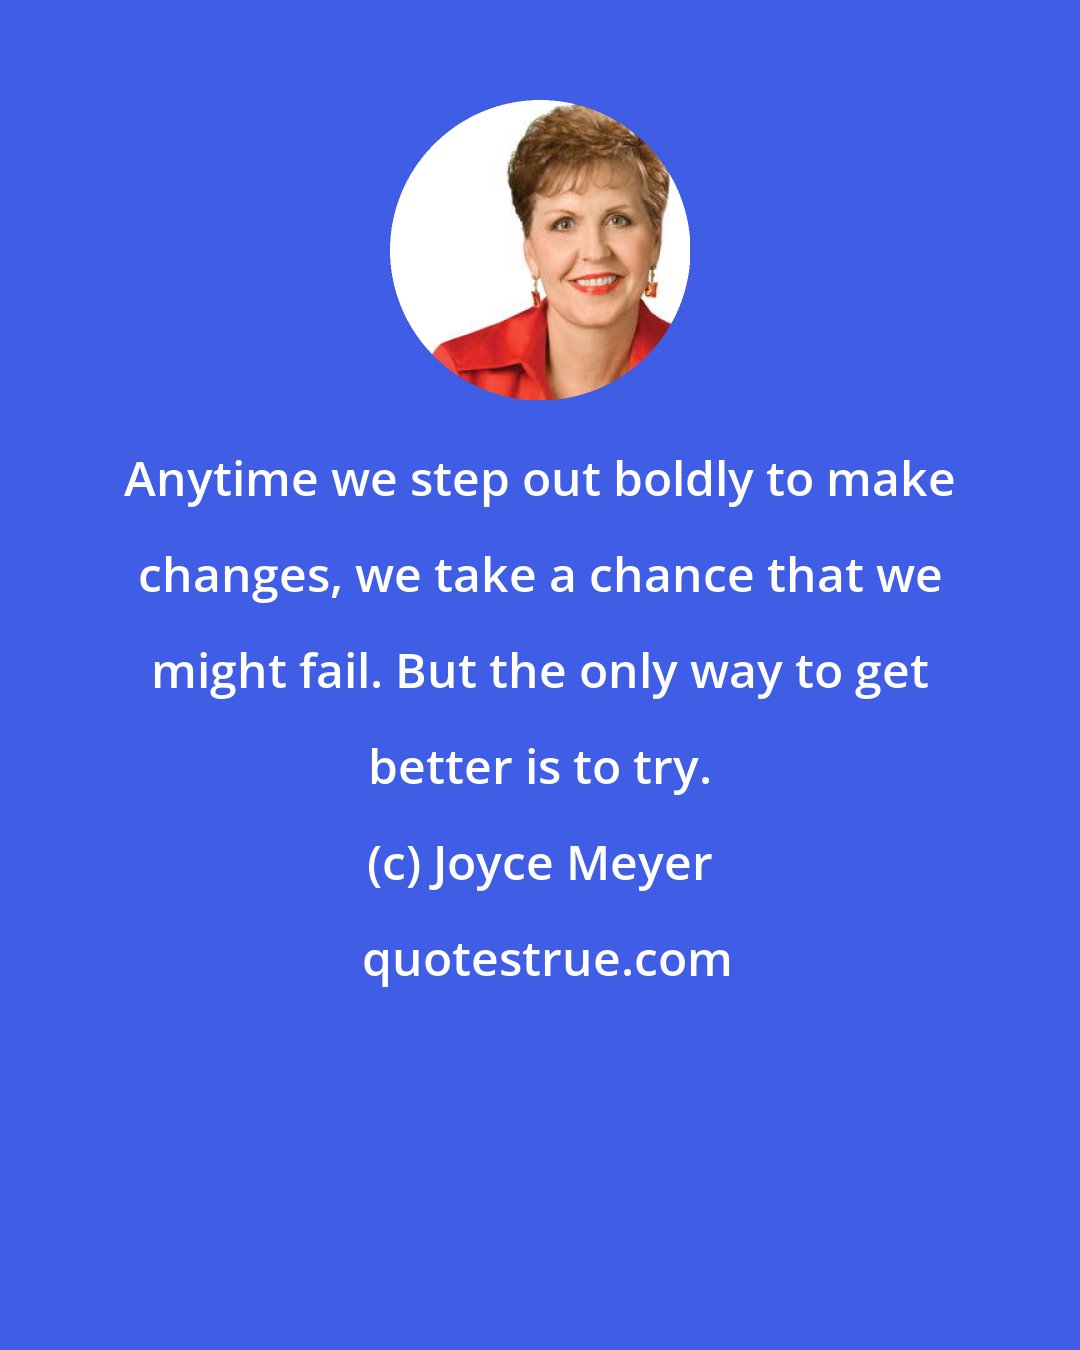 Joyce Meyer: Anytime we step out boldly to make changes, we take a chance that we might fail. But the only way to get better is to try.